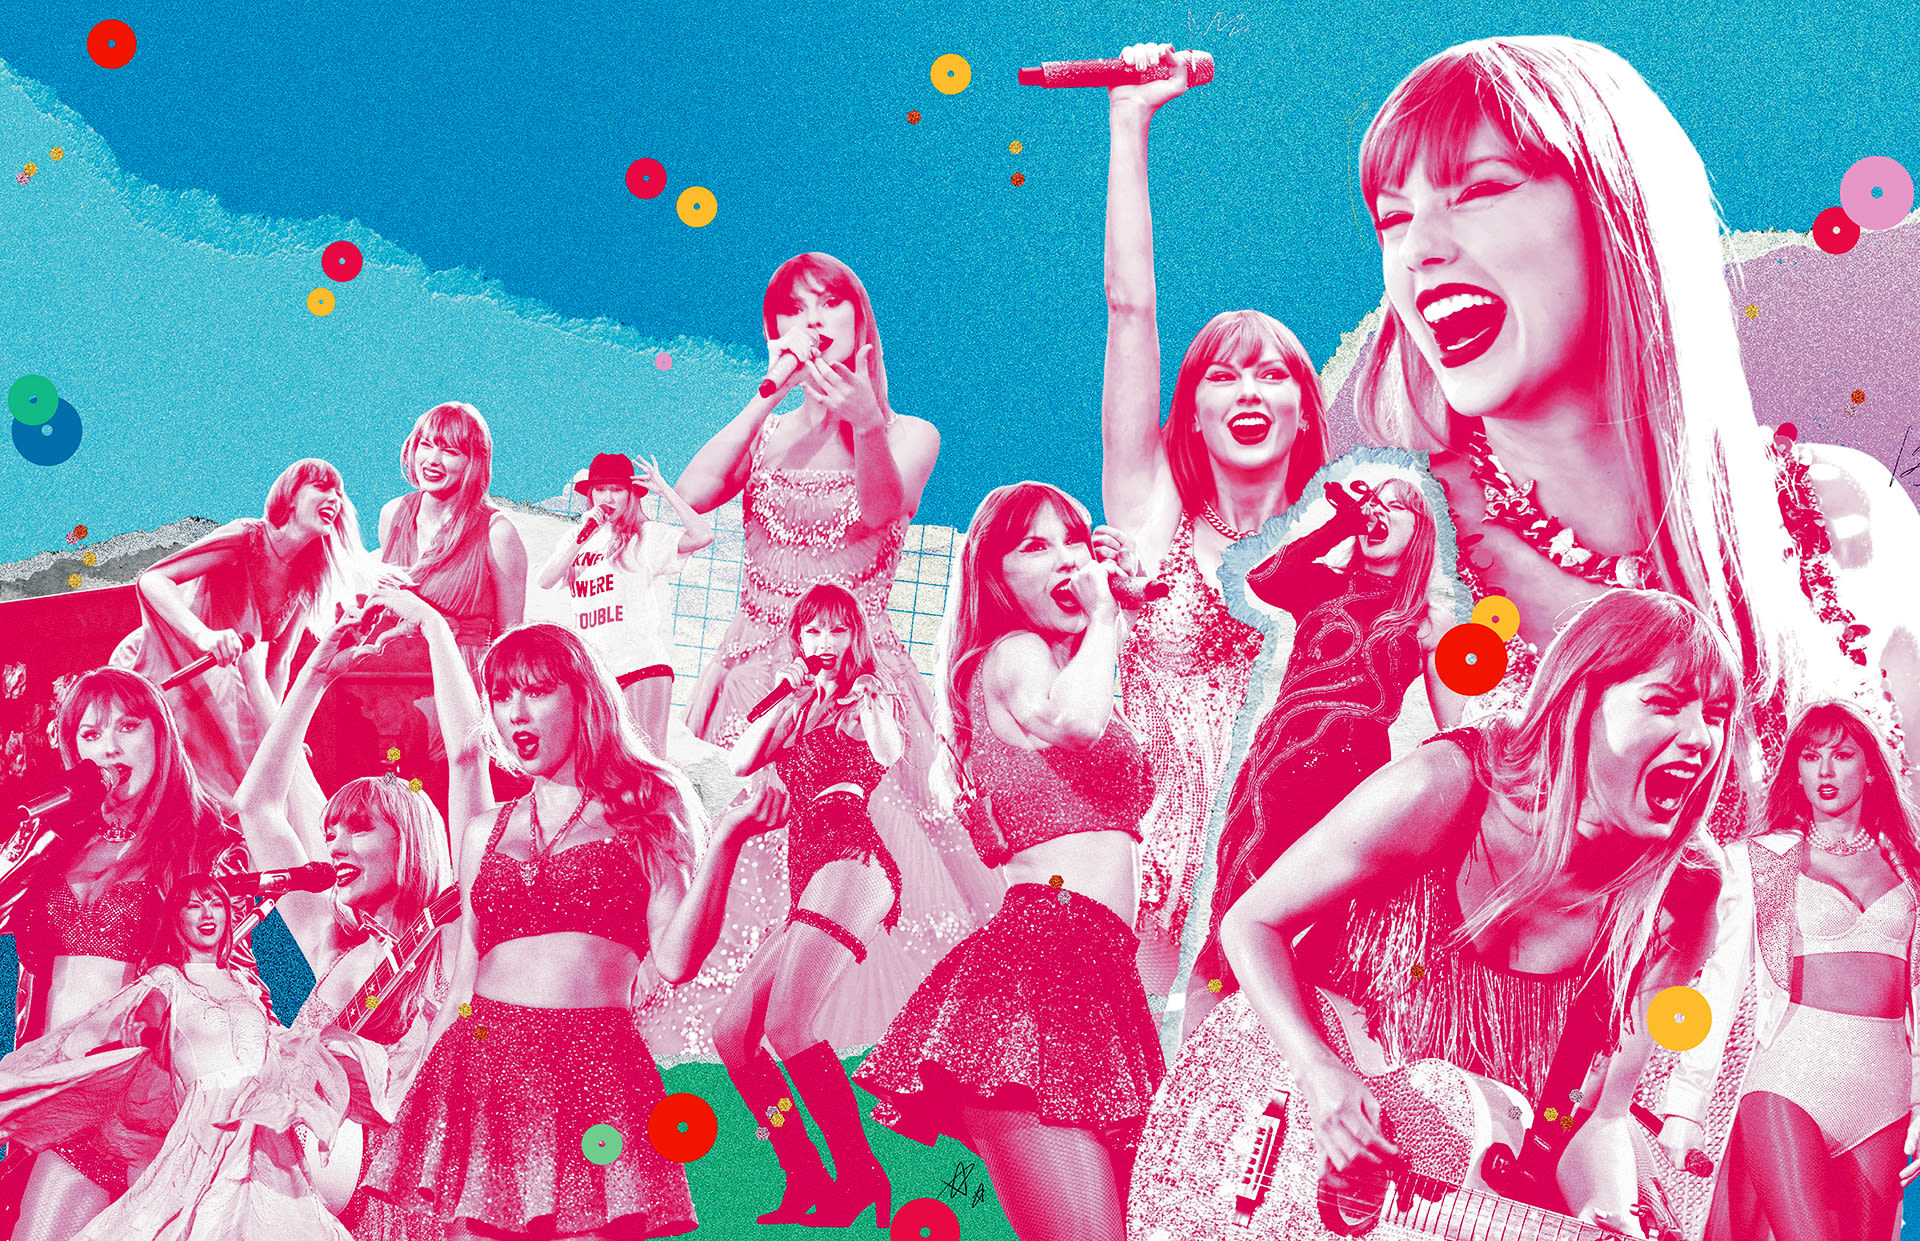 How Taylor Swift’s Eras Tour Took Over the Entire World